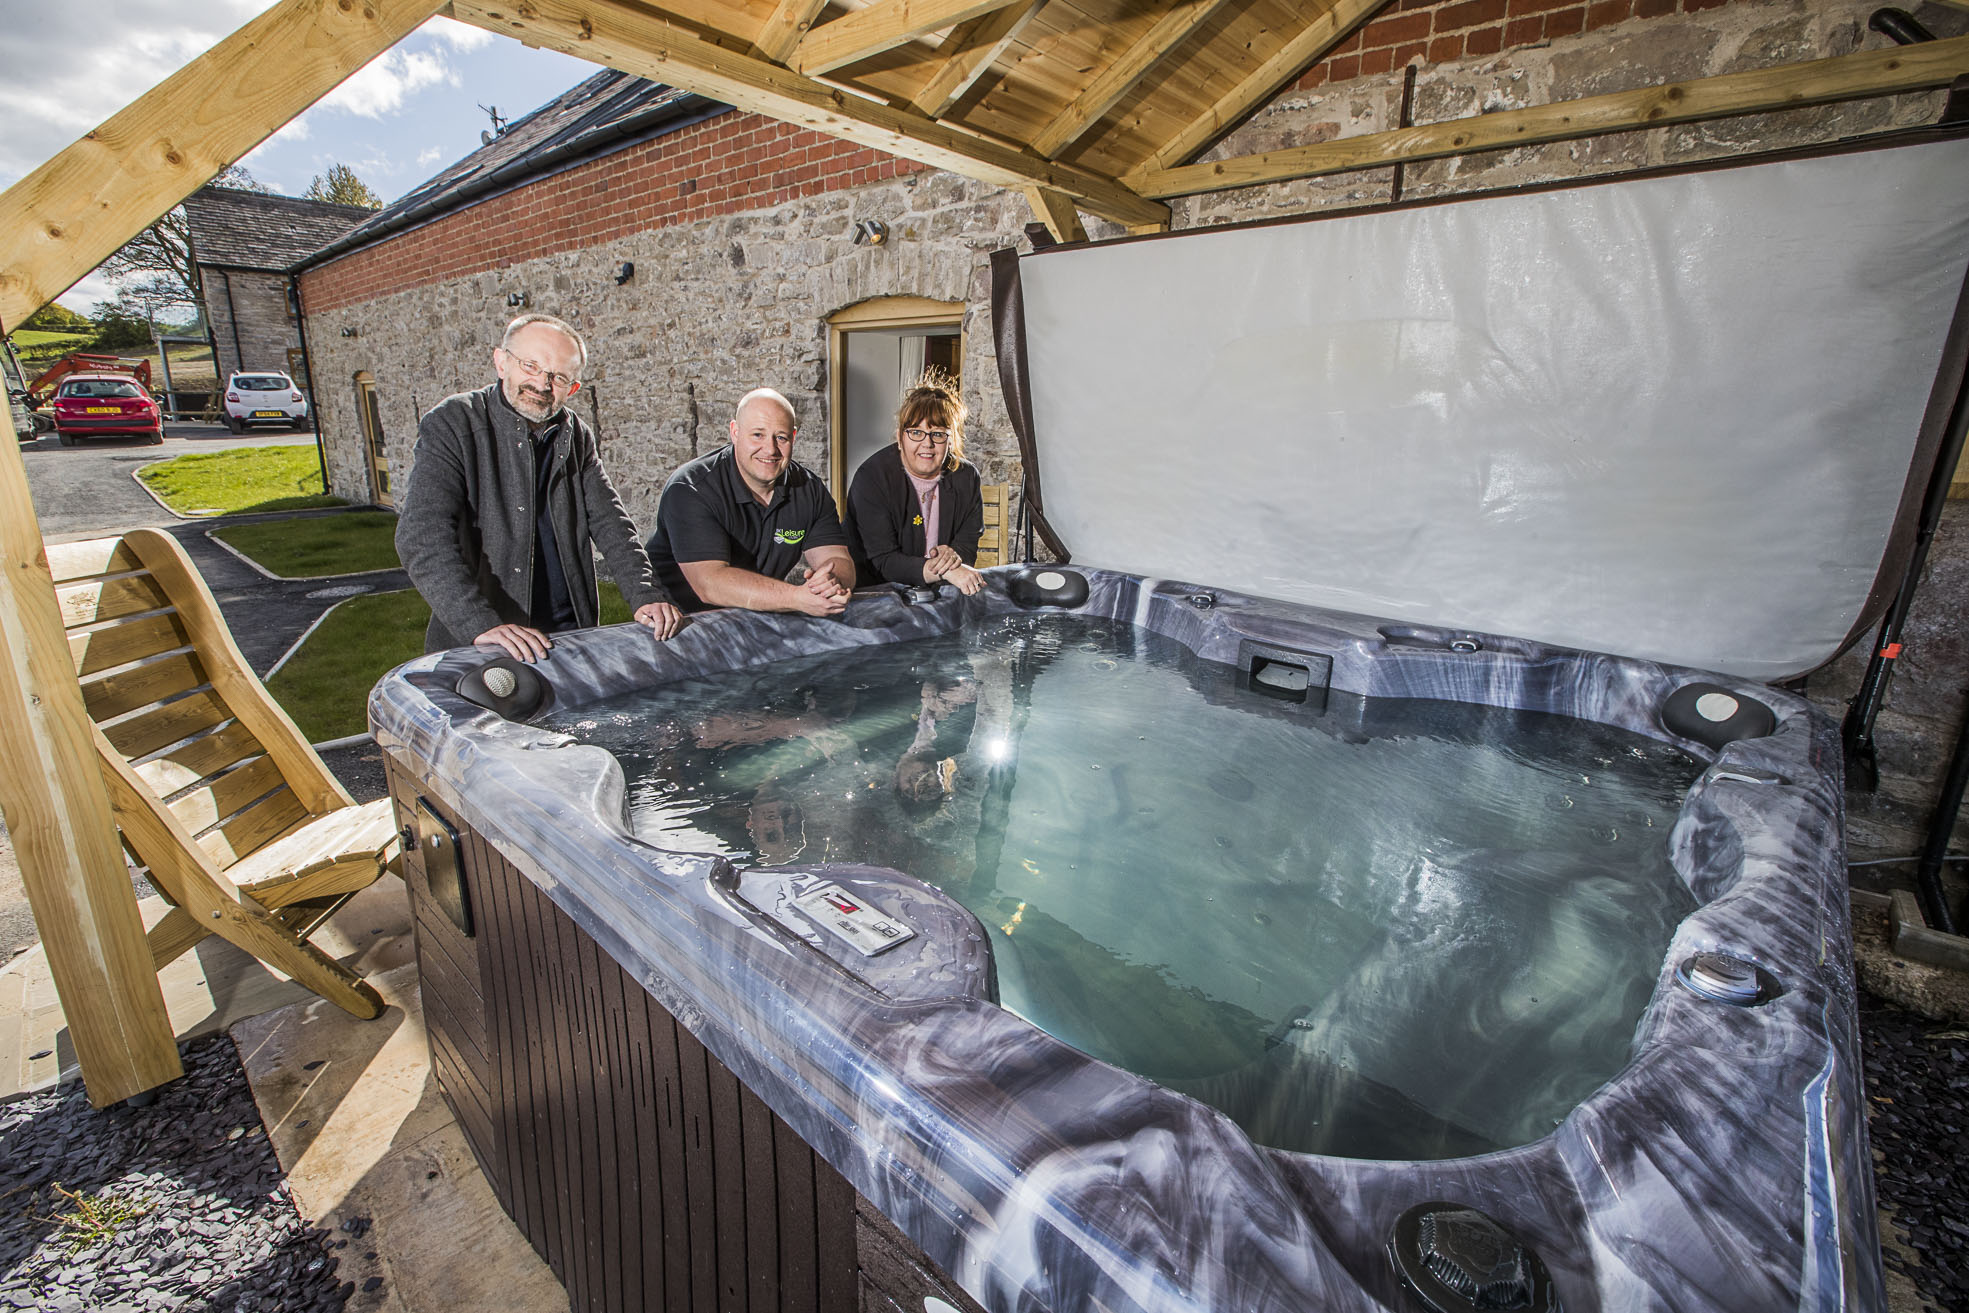 Holiday cottage hot tubs will see visitors splash out an extra £27m in North Wales